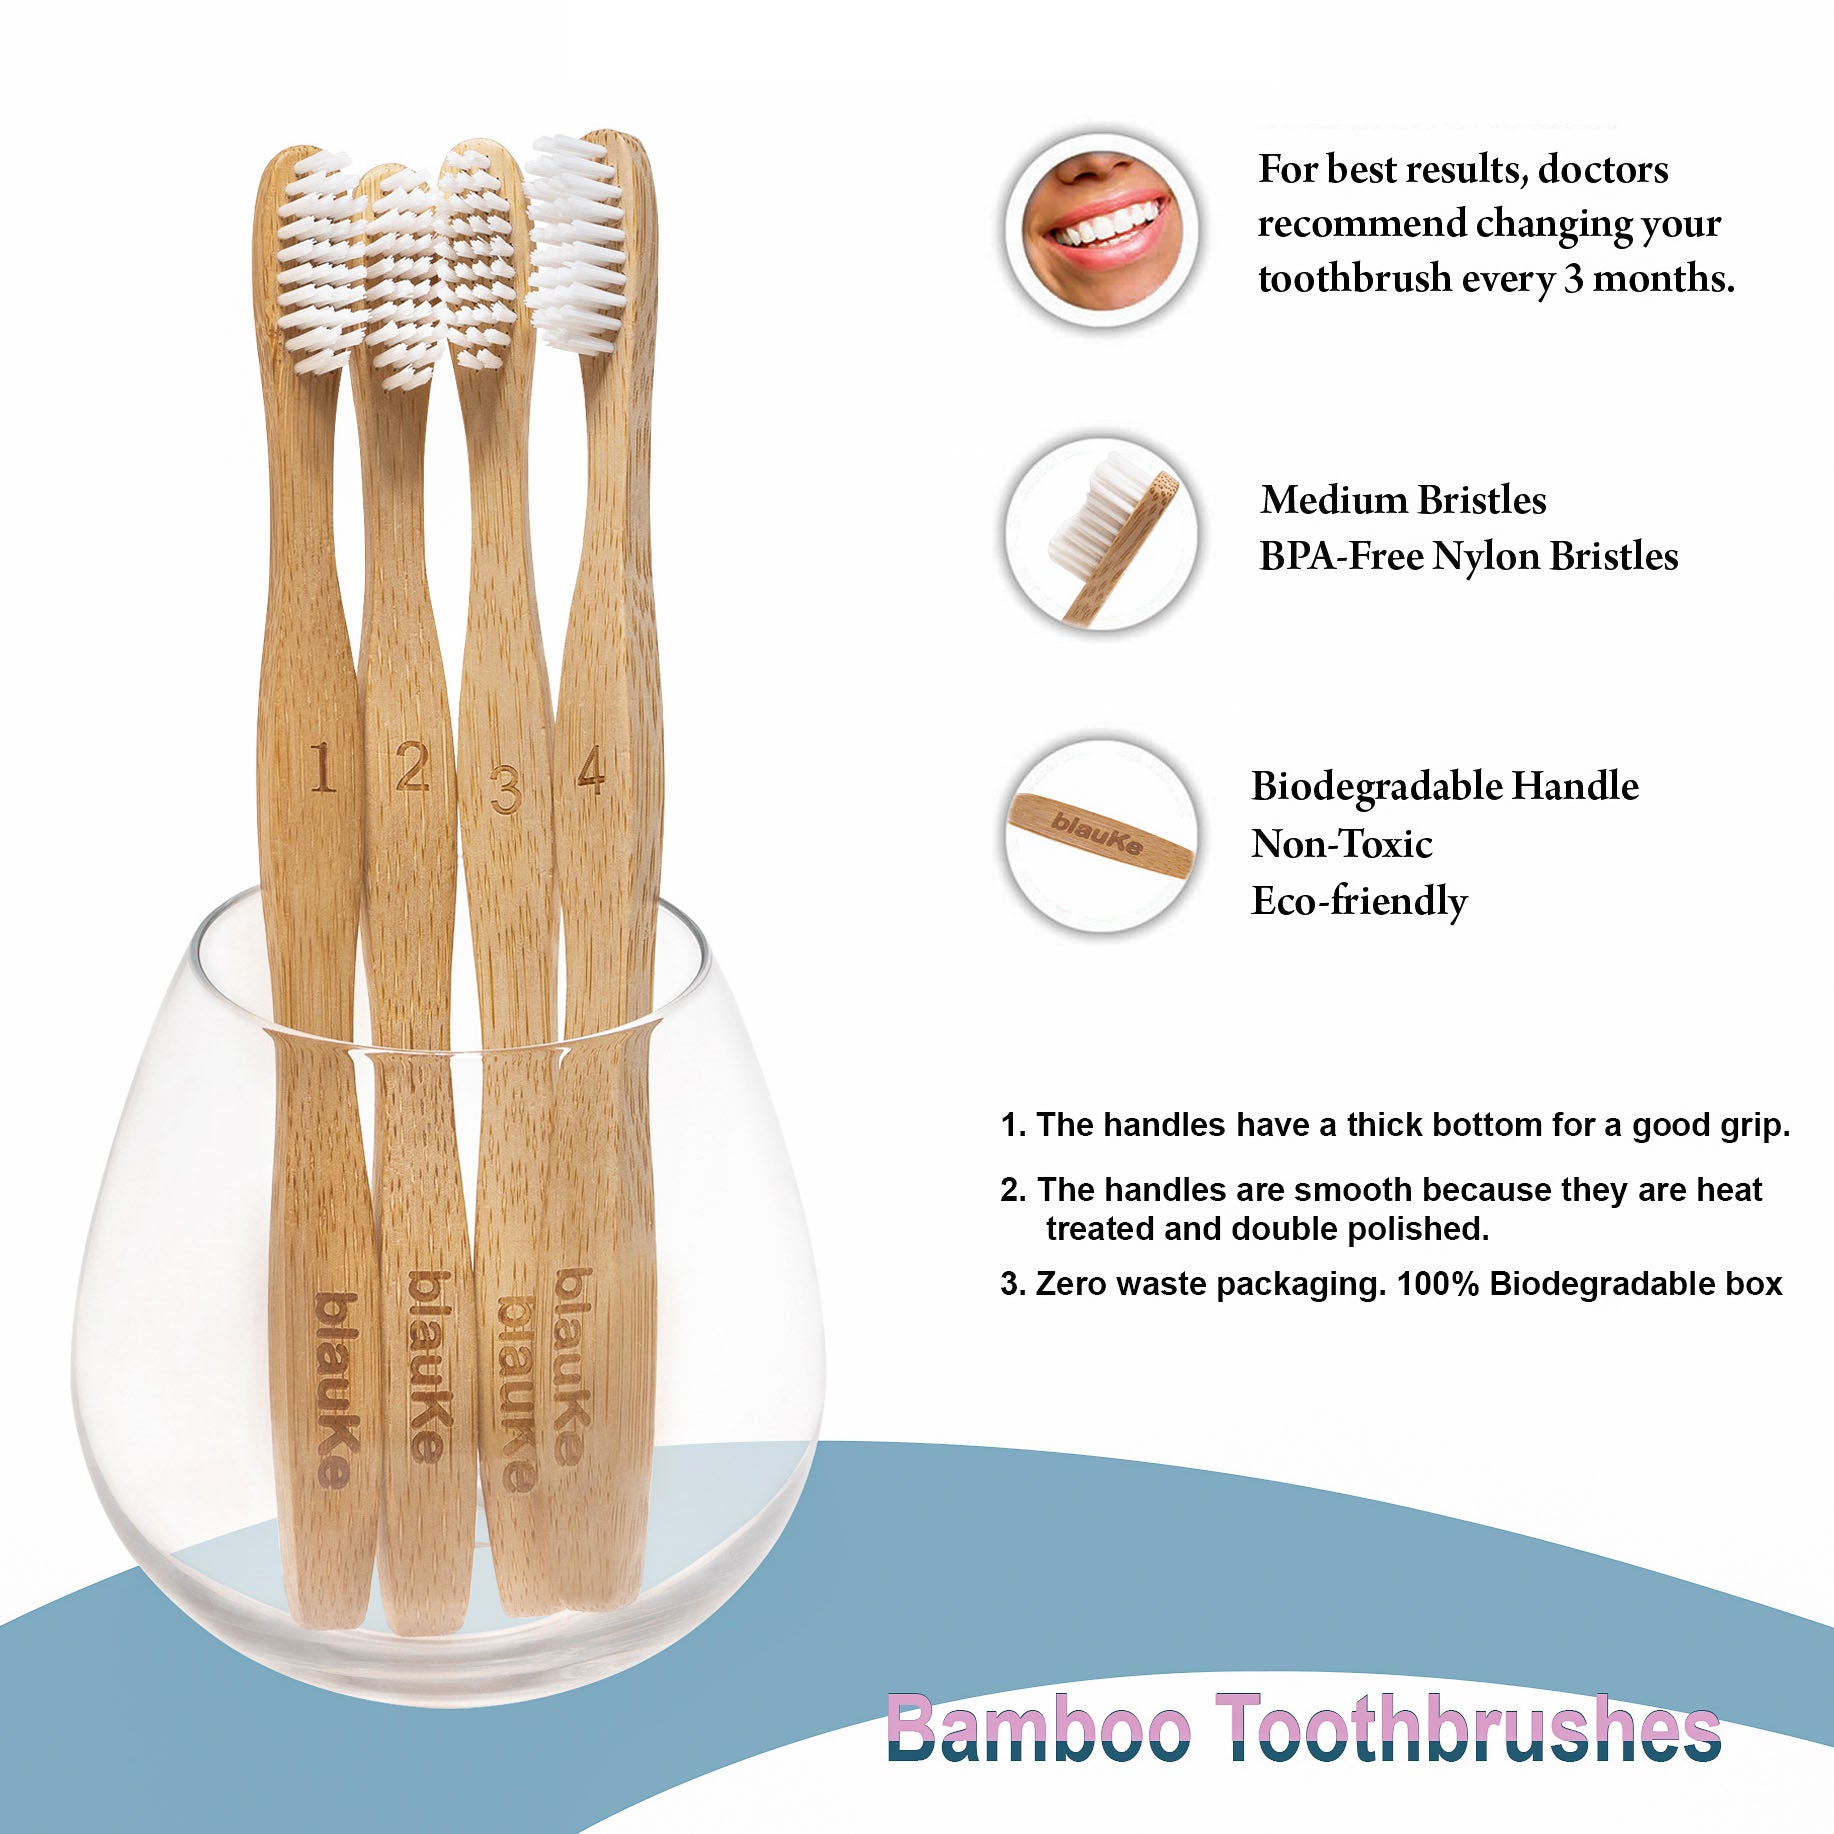 Bamboo Toothbrush Set 4-Pack - Bamboo Toothbrushes with Medium Bristles for Adults - Eco-Friendly, Biodegradable, Natural Wooden Toothbrushes